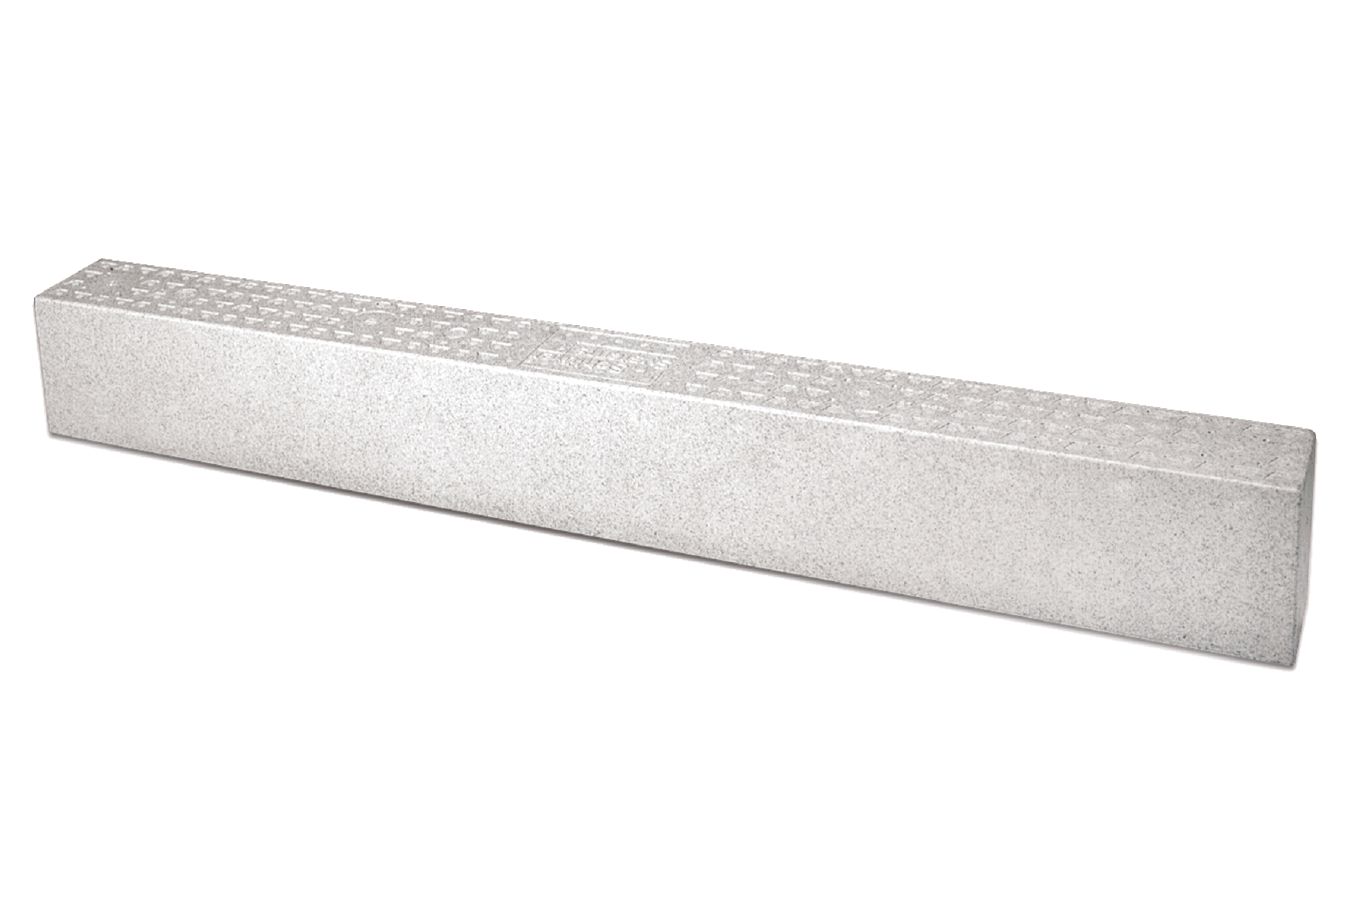 Kerdi Shower Curb 48 Inch by Schluter Systems